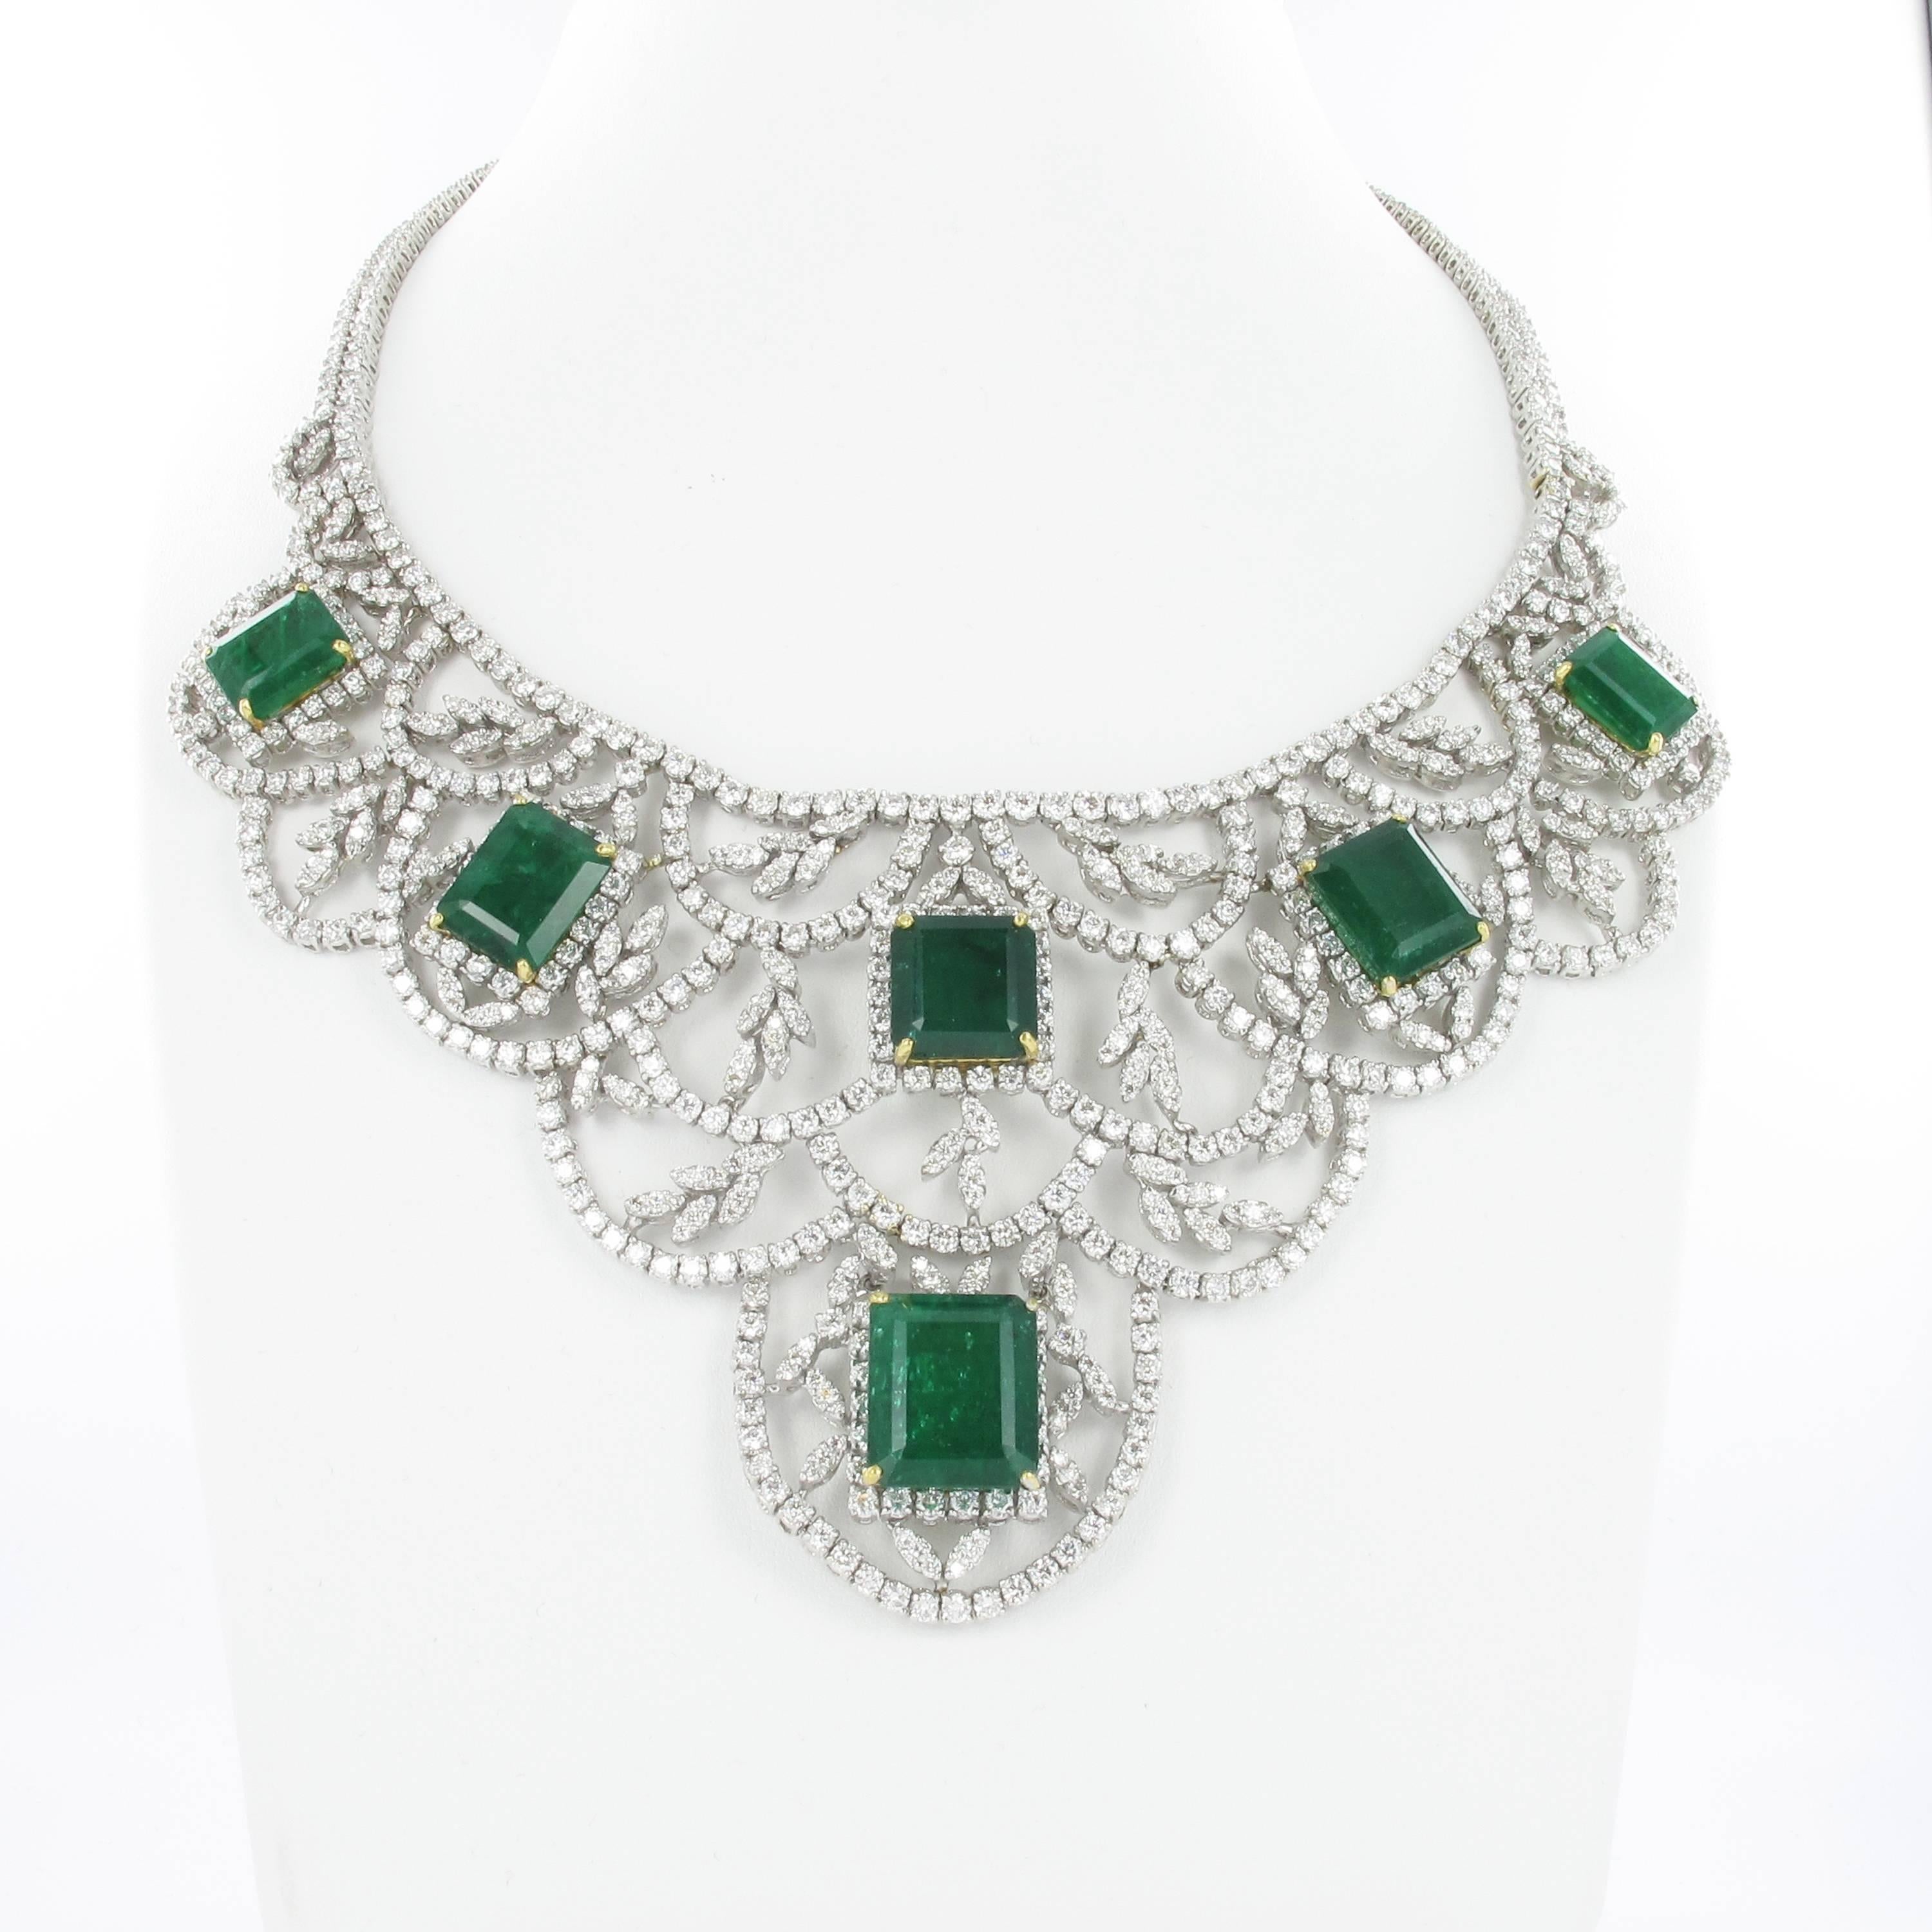 A full set consisting of necklace, bracelet, ear hangers and ring. 14 emeralds of approximate 78 ct in total are the main attraction in this impressive parure. The astonishing number of 1754 round cut diamonds weighing approximate 62 ct in total